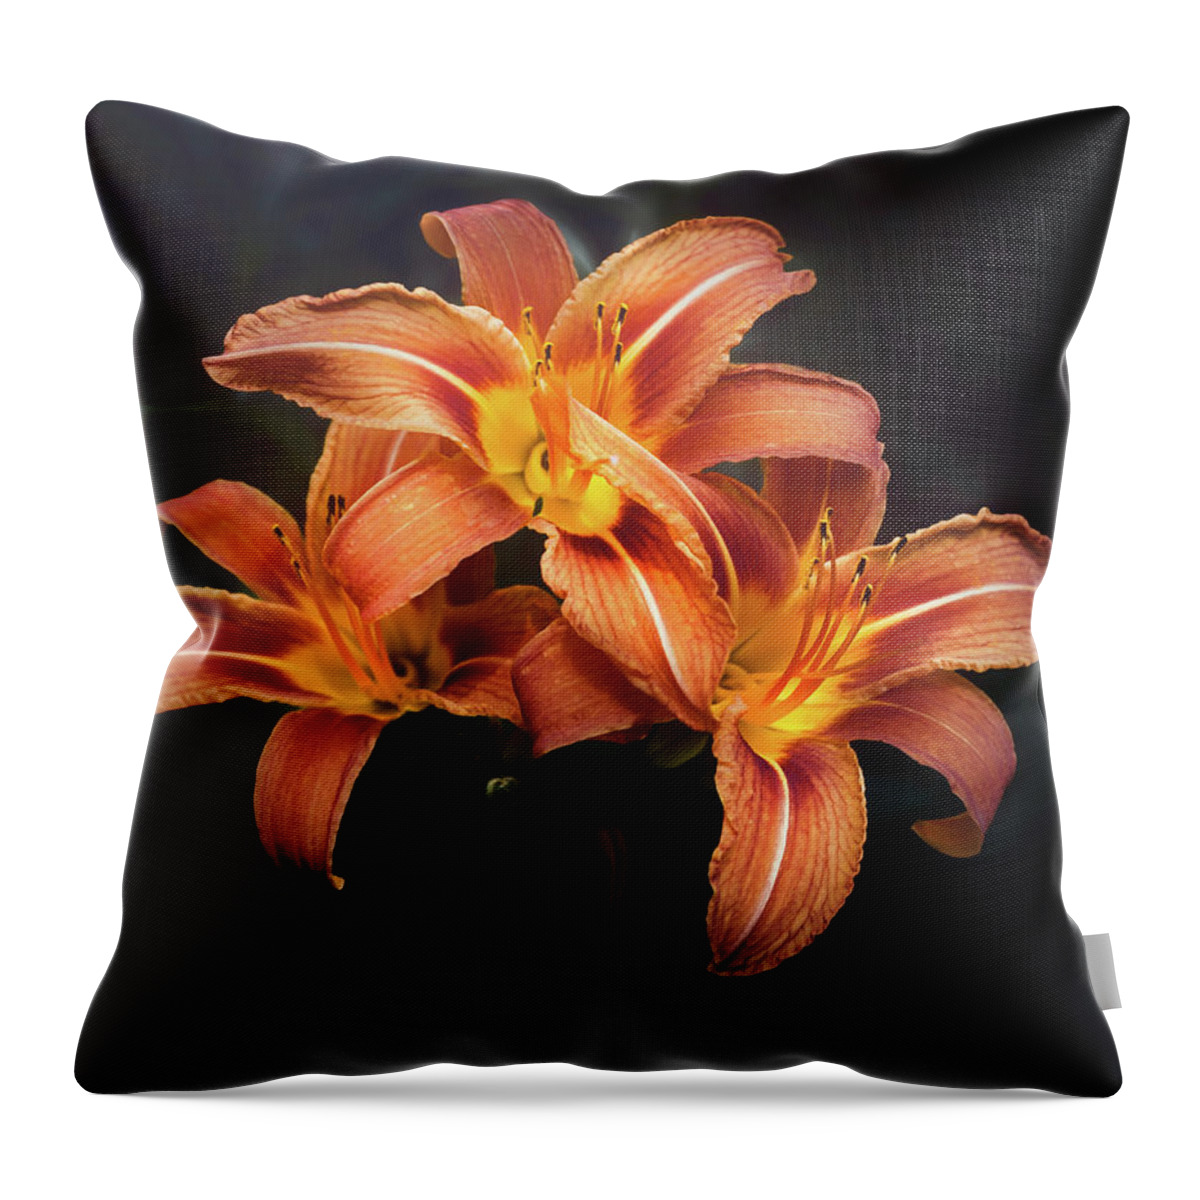 Lily Throw Pillow featuring the photograph Three Lilies by Scott Norris